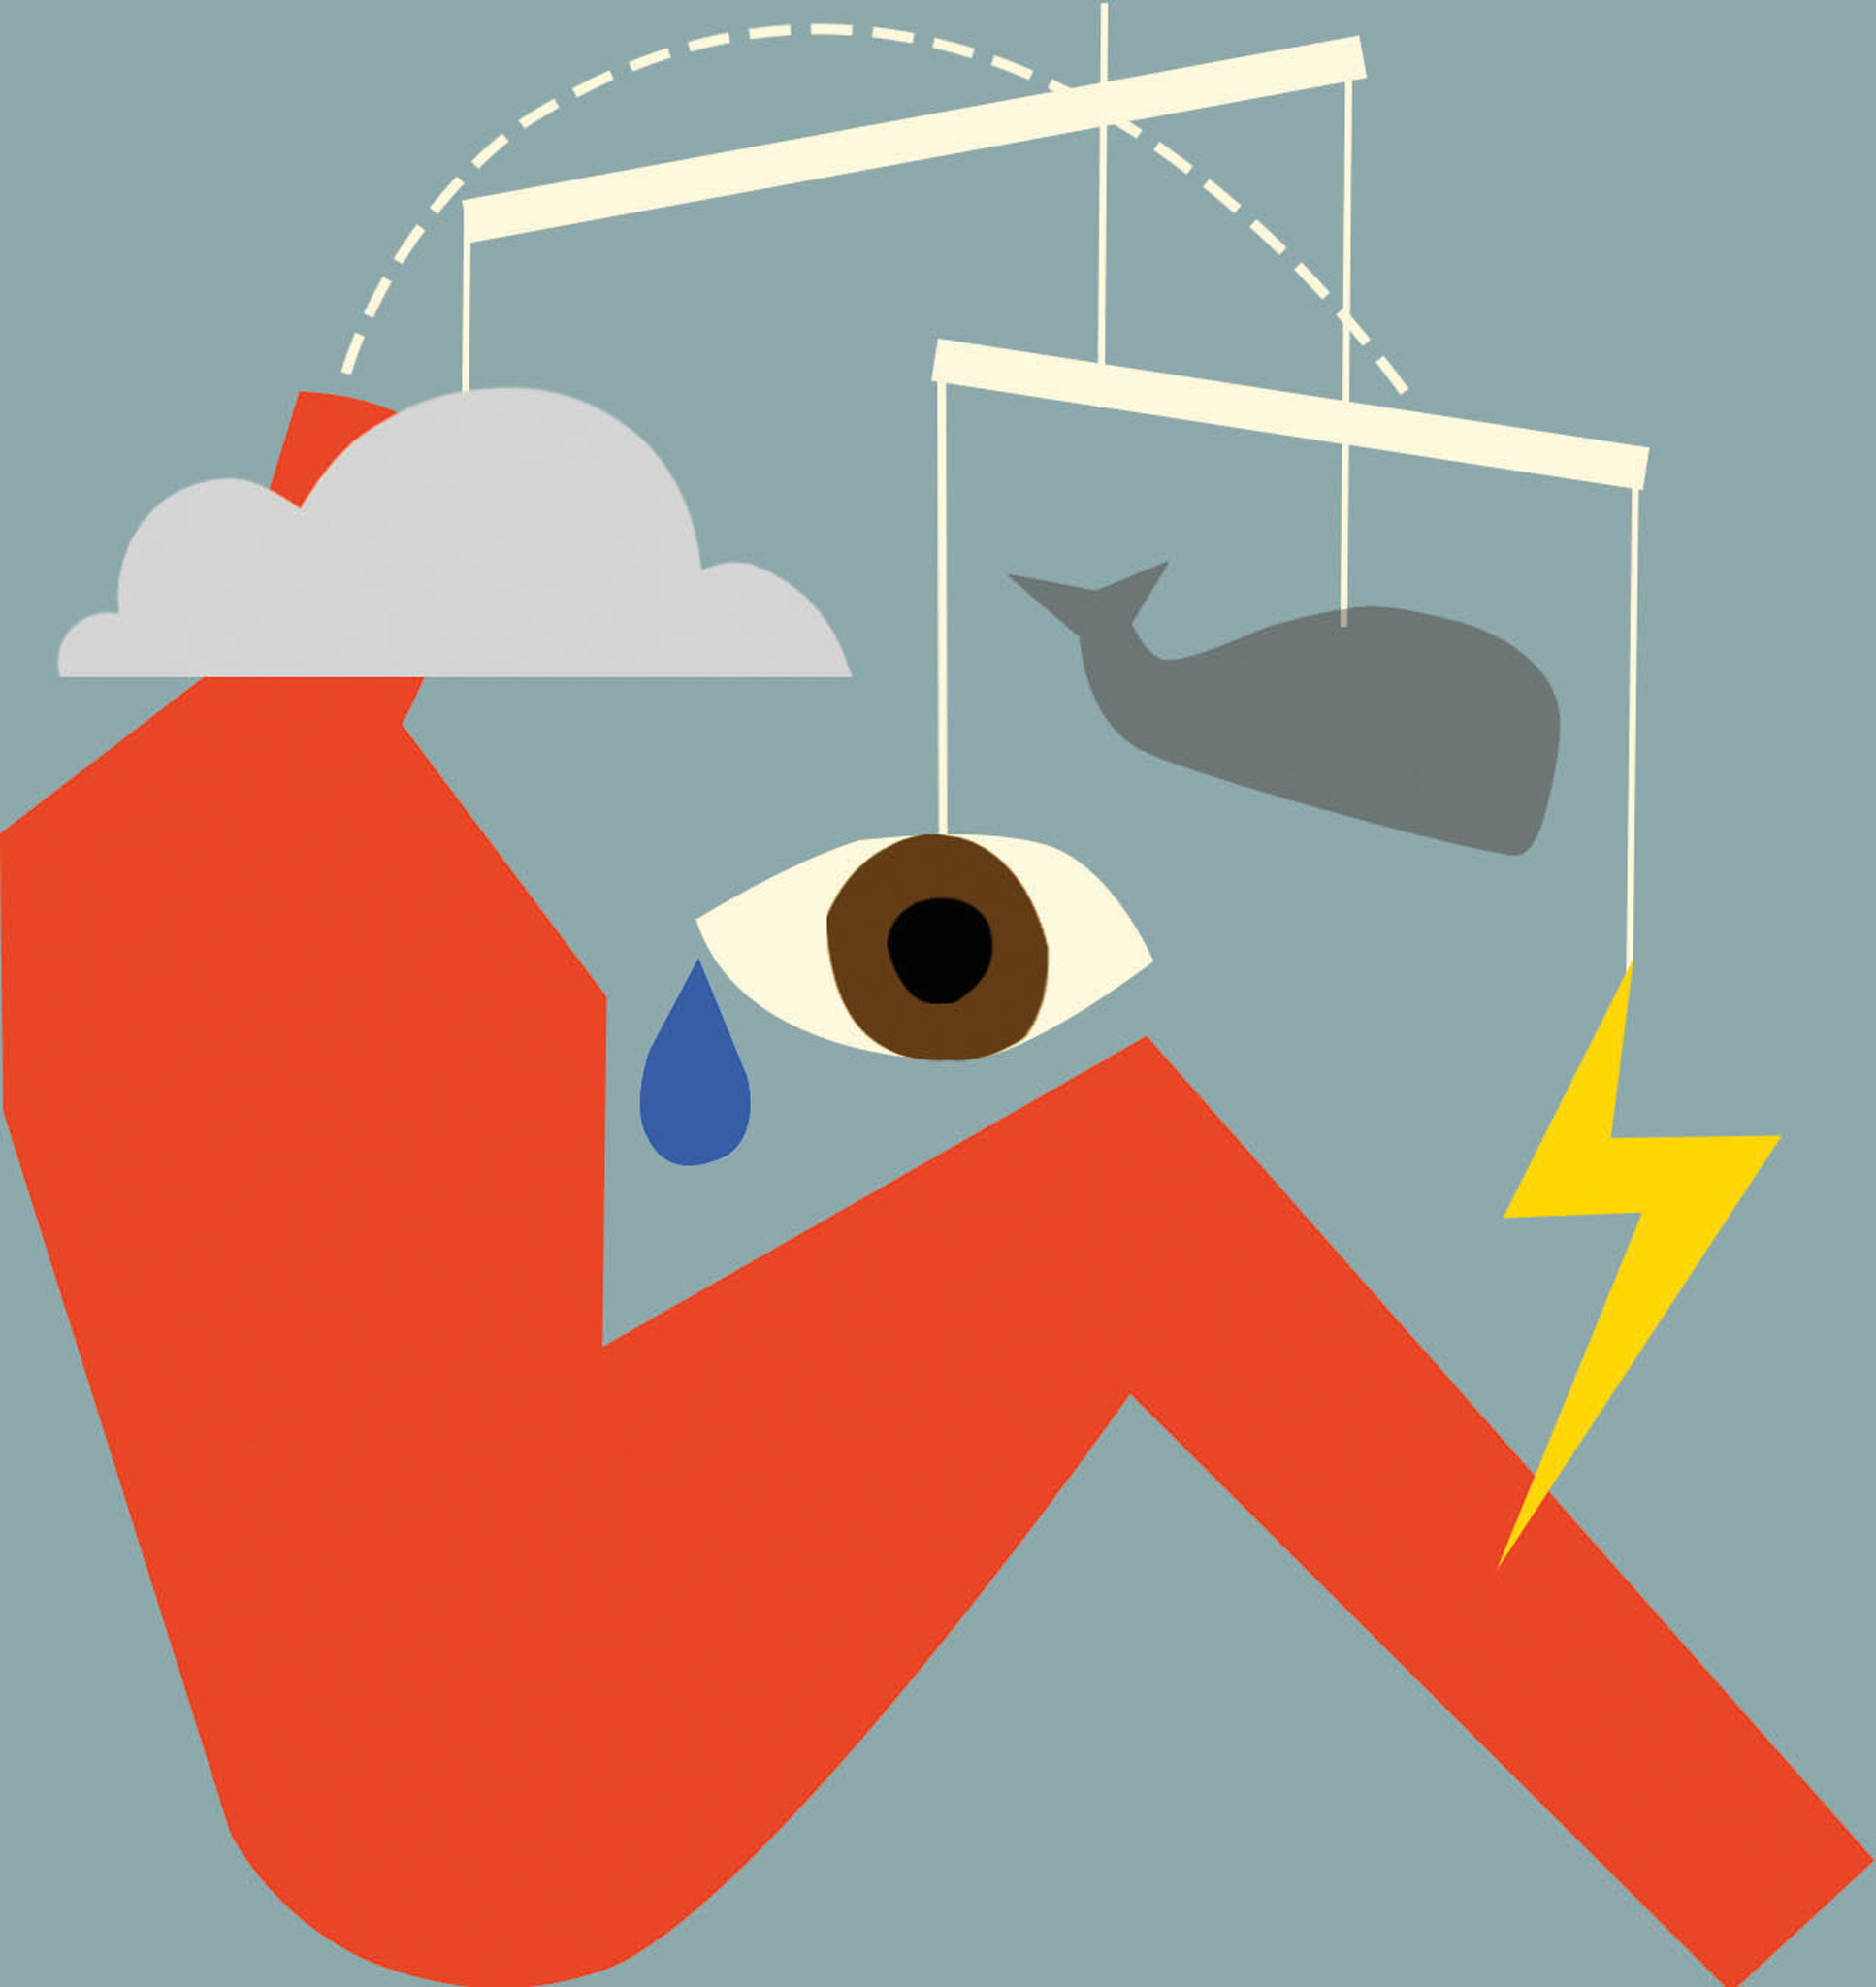 Illustration depicting a gloomy day; an abstract orange, headless character sits balancing images of a whale, a lightning bolt, a gray cloud and a teary eye.